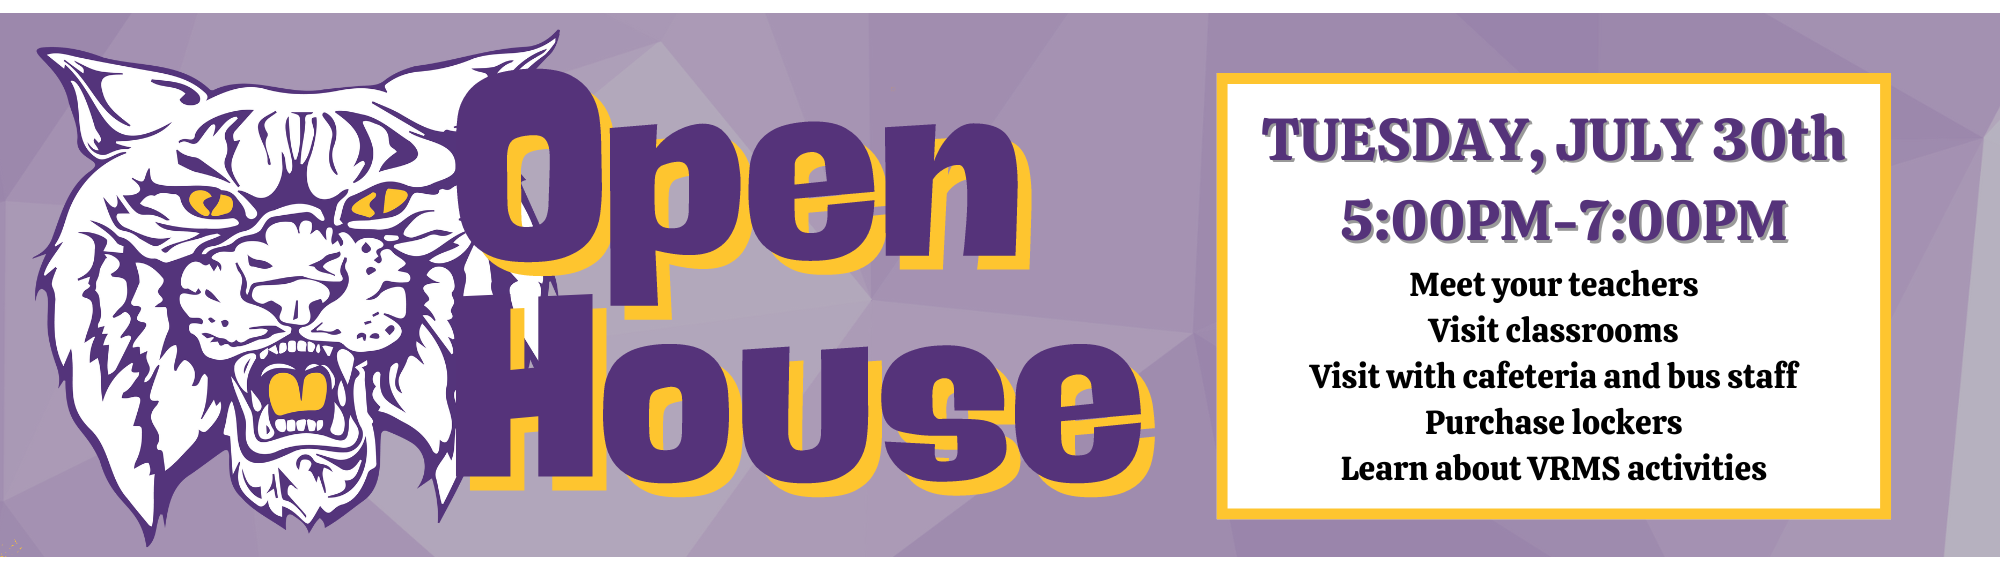 wildcat mascot with the words Open House beside.  TUESDAY, JULY 30th. BETWEEN 5PM AND 7PM. MEET YOUR TEACHERS AND ADMINISTRATION VISIT THE CLASSROOMS GET BUS INFORMATION PURCHASE LOCKER: CASH, CHECK, OR REVTRAK INFORMATION ON CLUBS & ATHLETICS